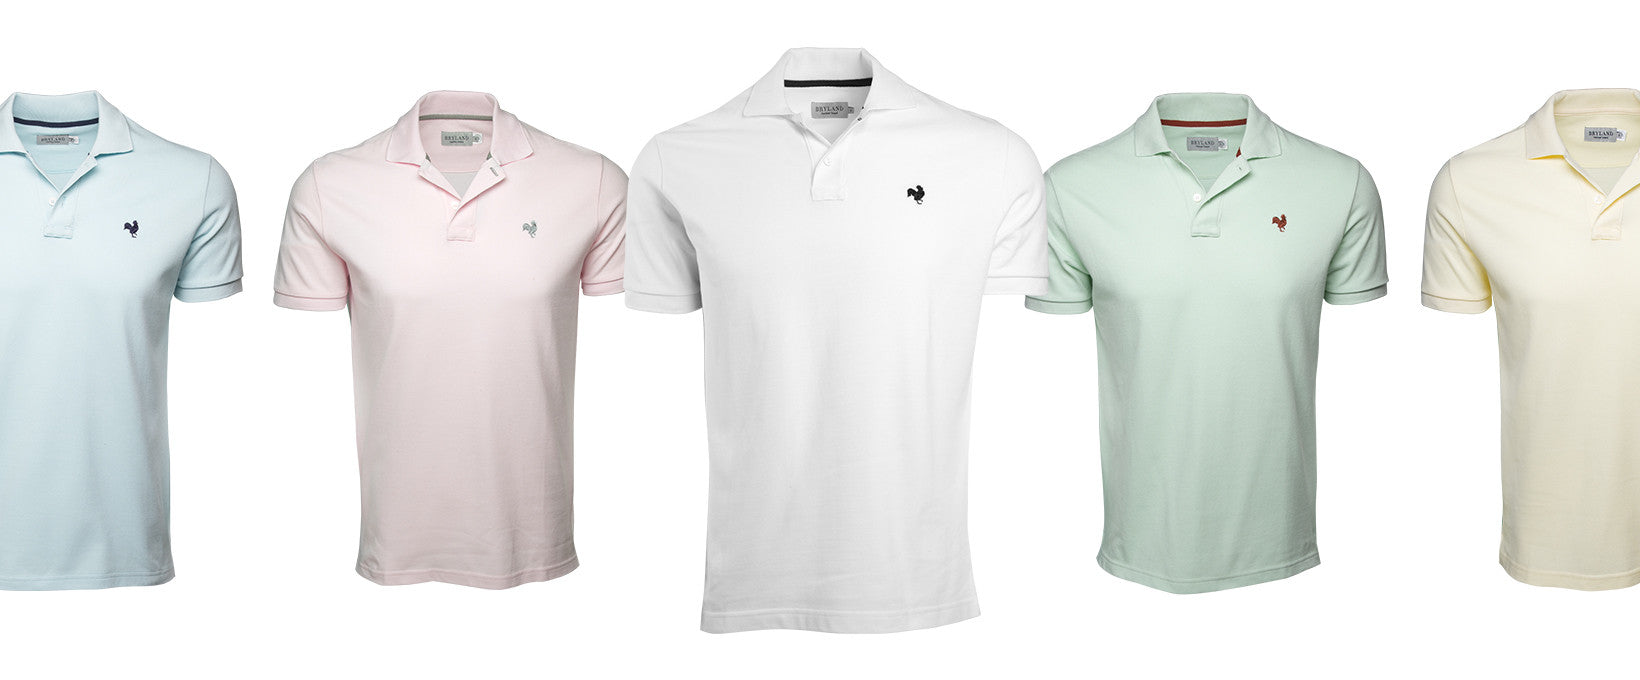 Spring brings new colors to our Polo Shirts